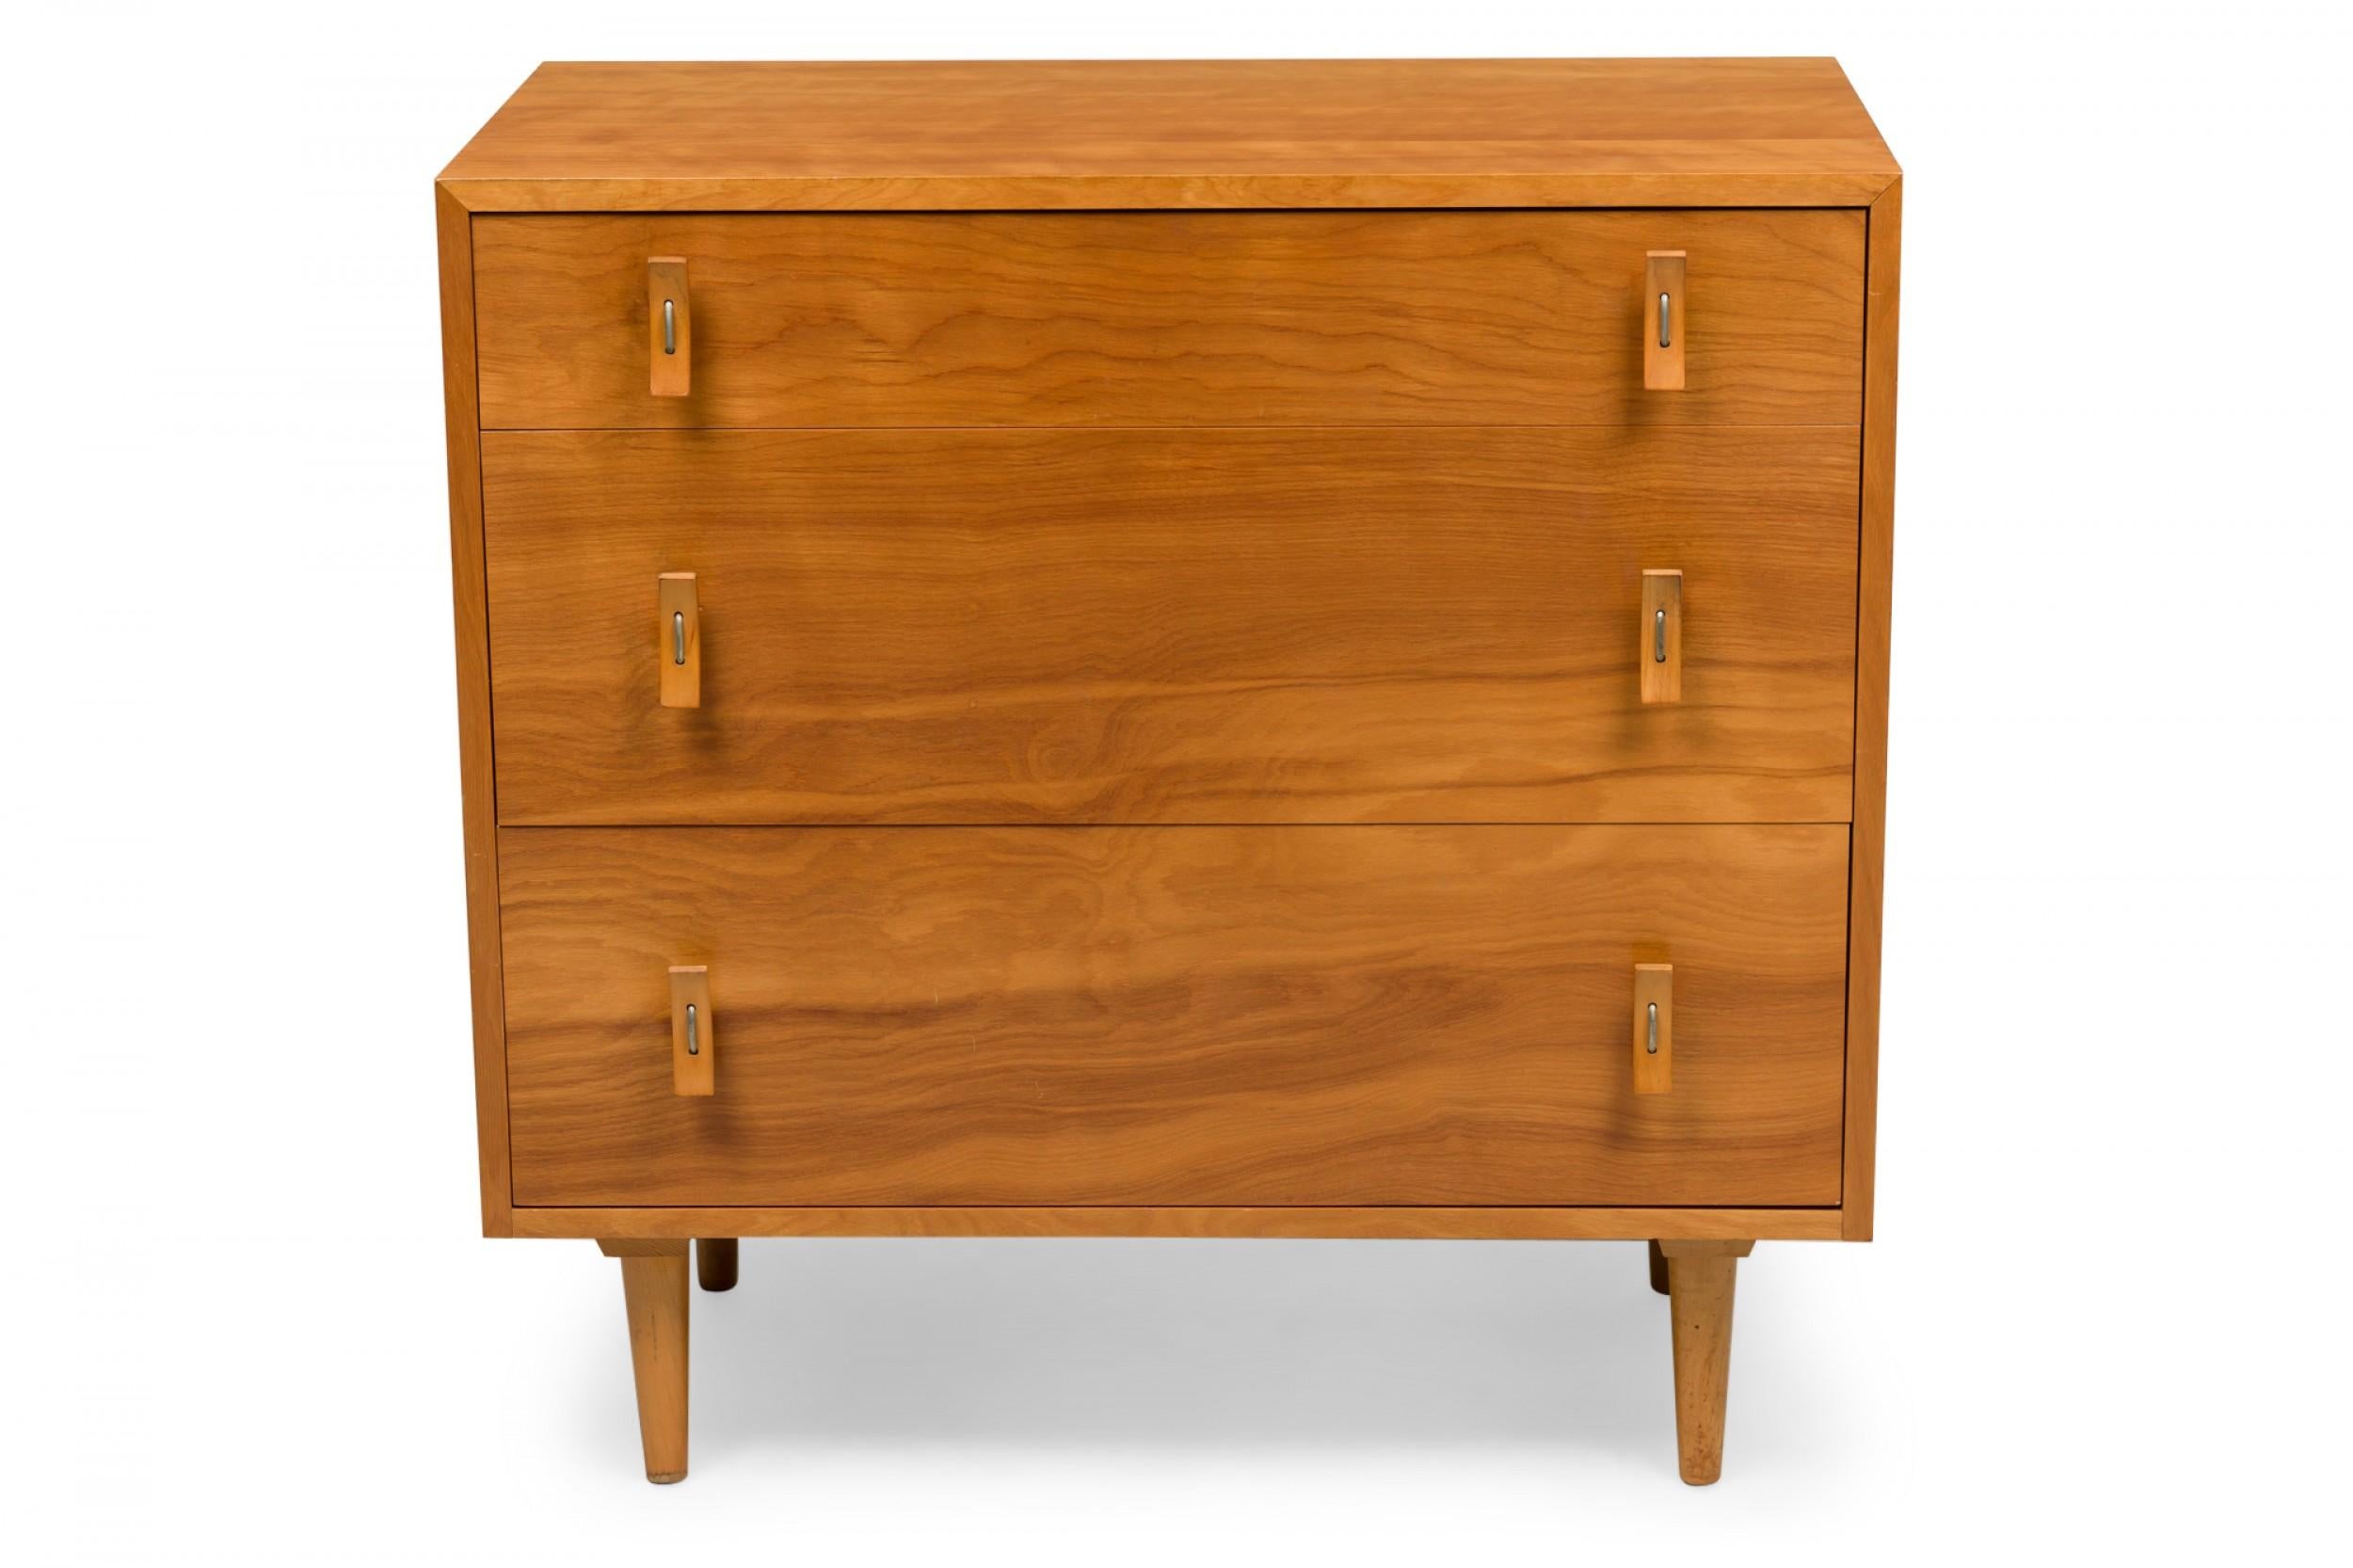 American mid-century blonde wood three drawer chest with curved plywood drawer pulls resting on four tapered dowel legs. (STANLEY YOUNG FOR GLENN OF CALIFORNIA)